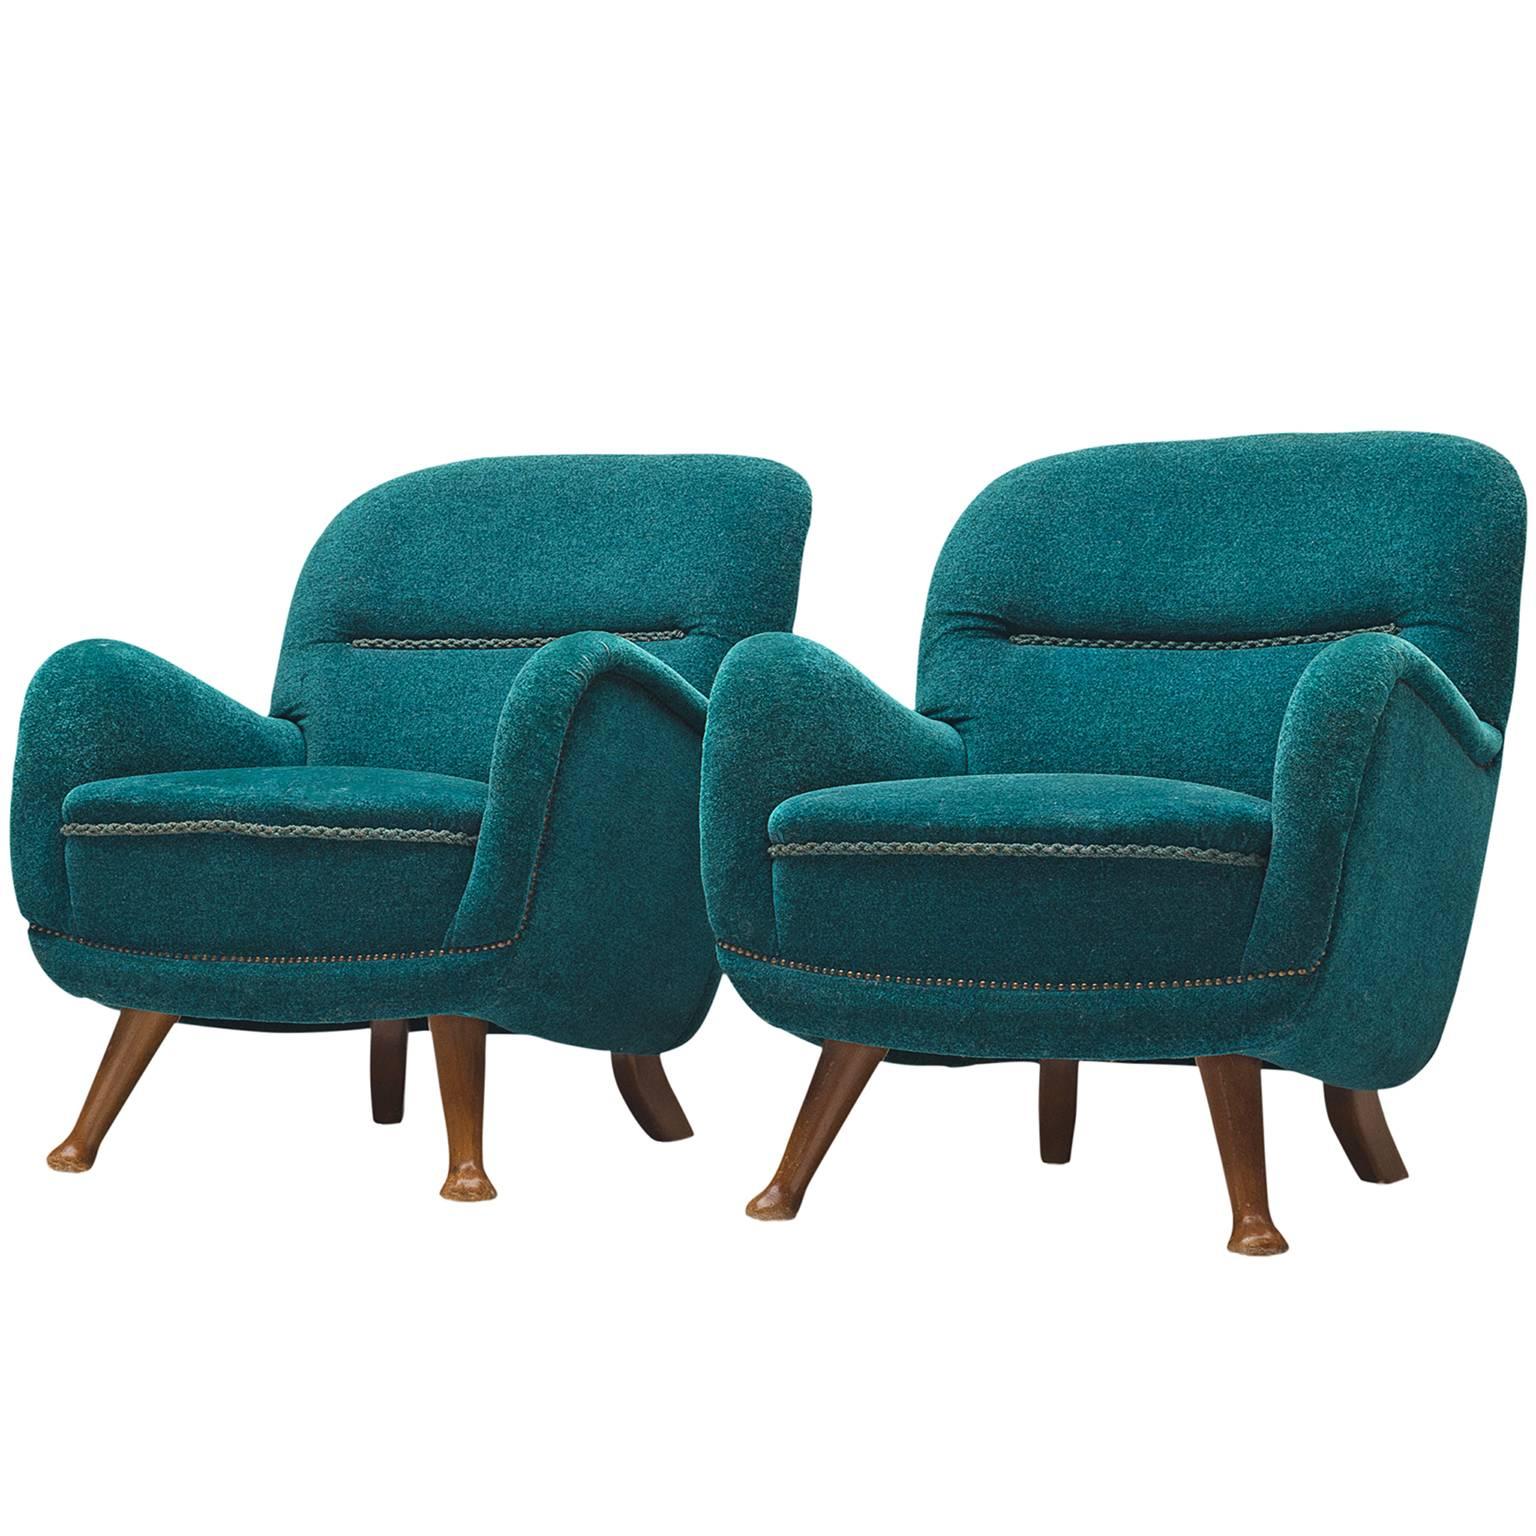 Berga Møbler Pair of Blue Lounge Chairs